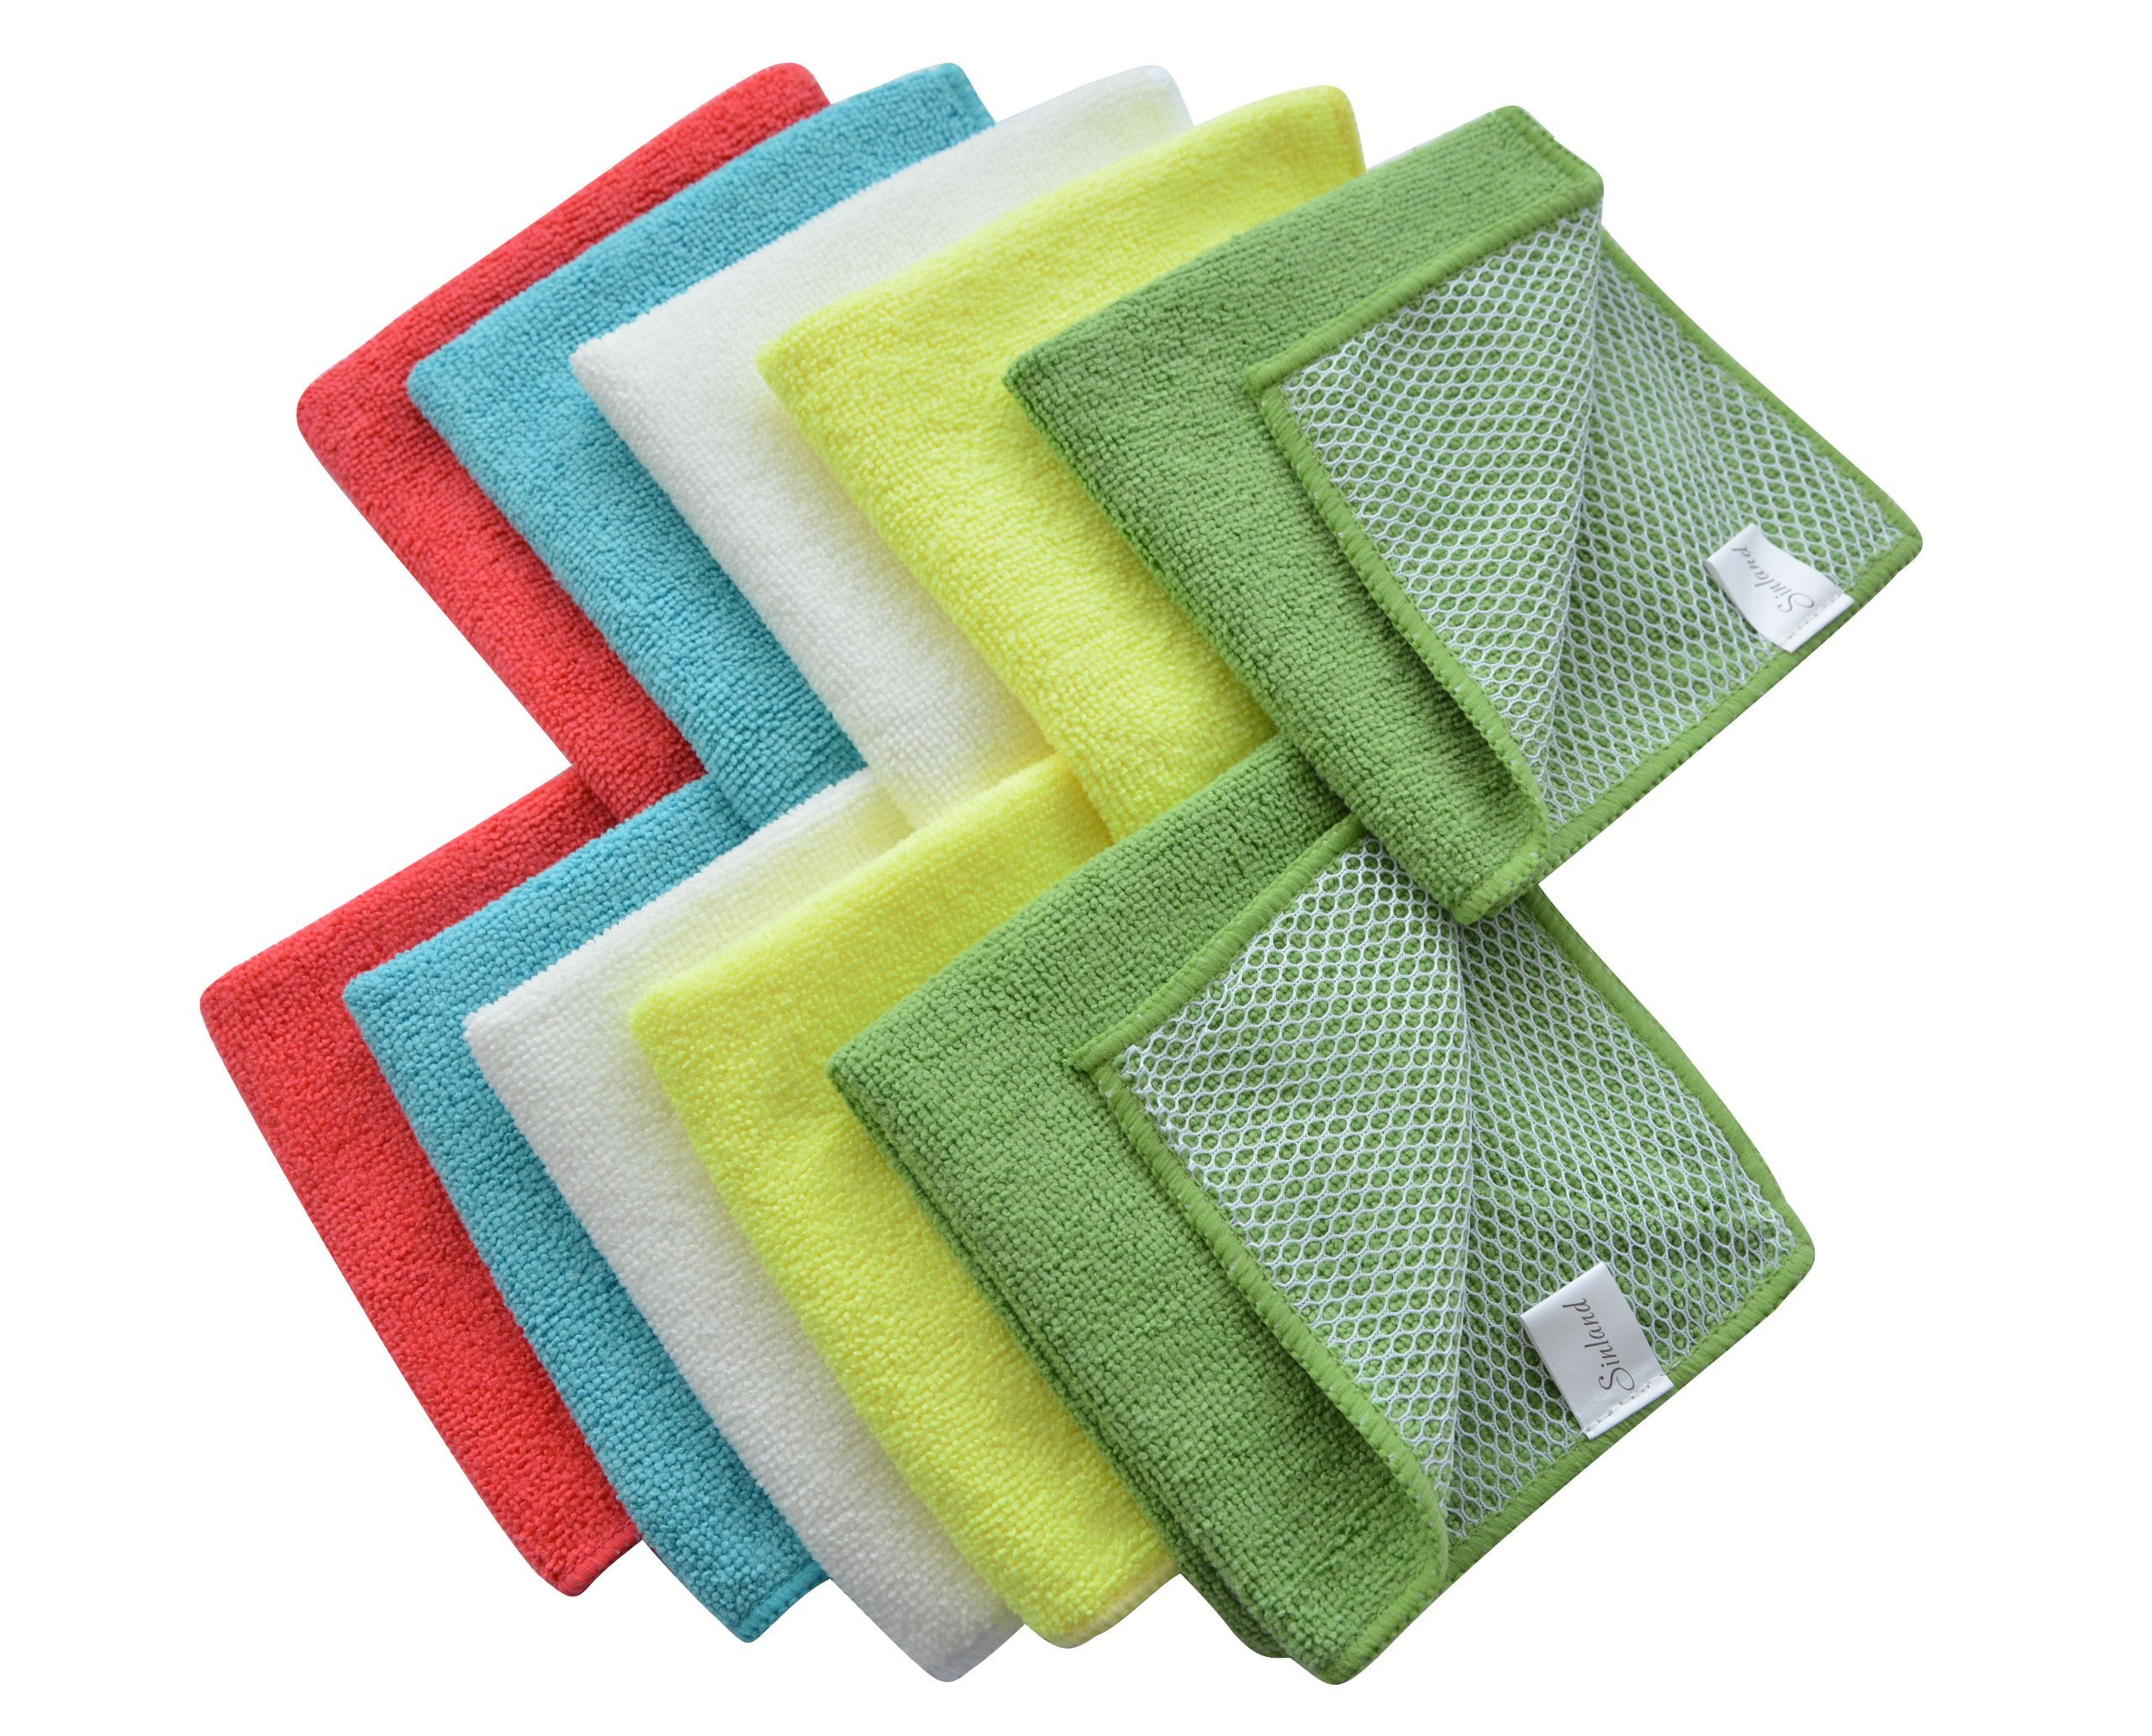 SINLAND Microfiber Dish Cloth for Washing Dishes Dish Rags Best Kitchen  Washcloth Cleaning Cloths with Poly Scour Side 5 Color Assorted  12inchx12inch 10pack Assorted Color 12inchx12inch 10pack